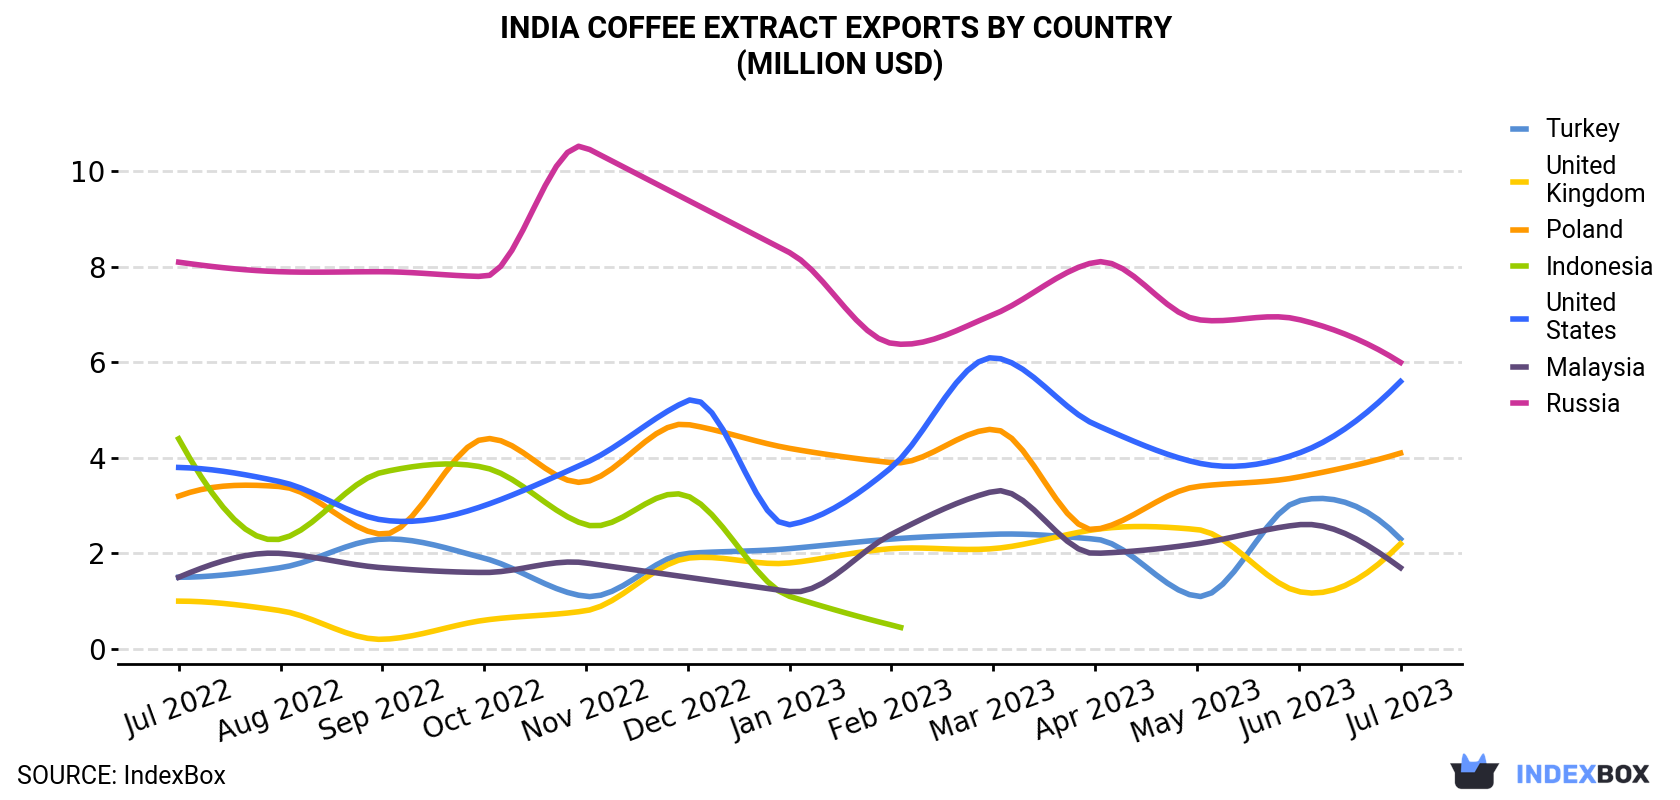 India Coffee Extract Exports By Country (Million USD)